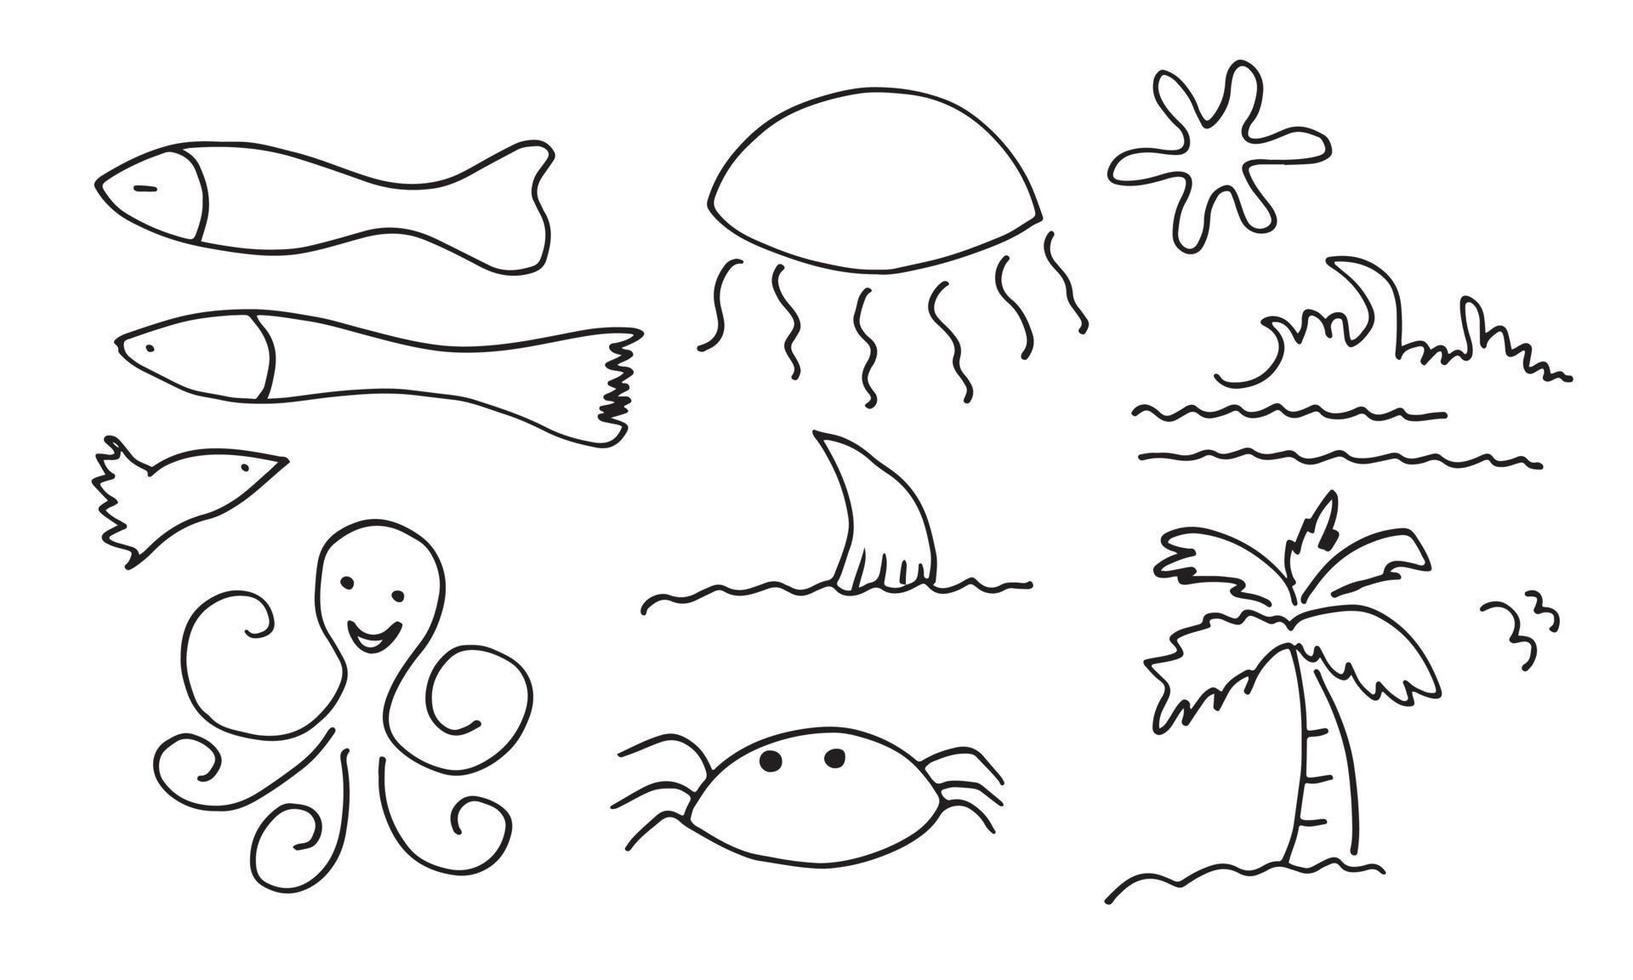 sea doodle drawing vector set on white background.